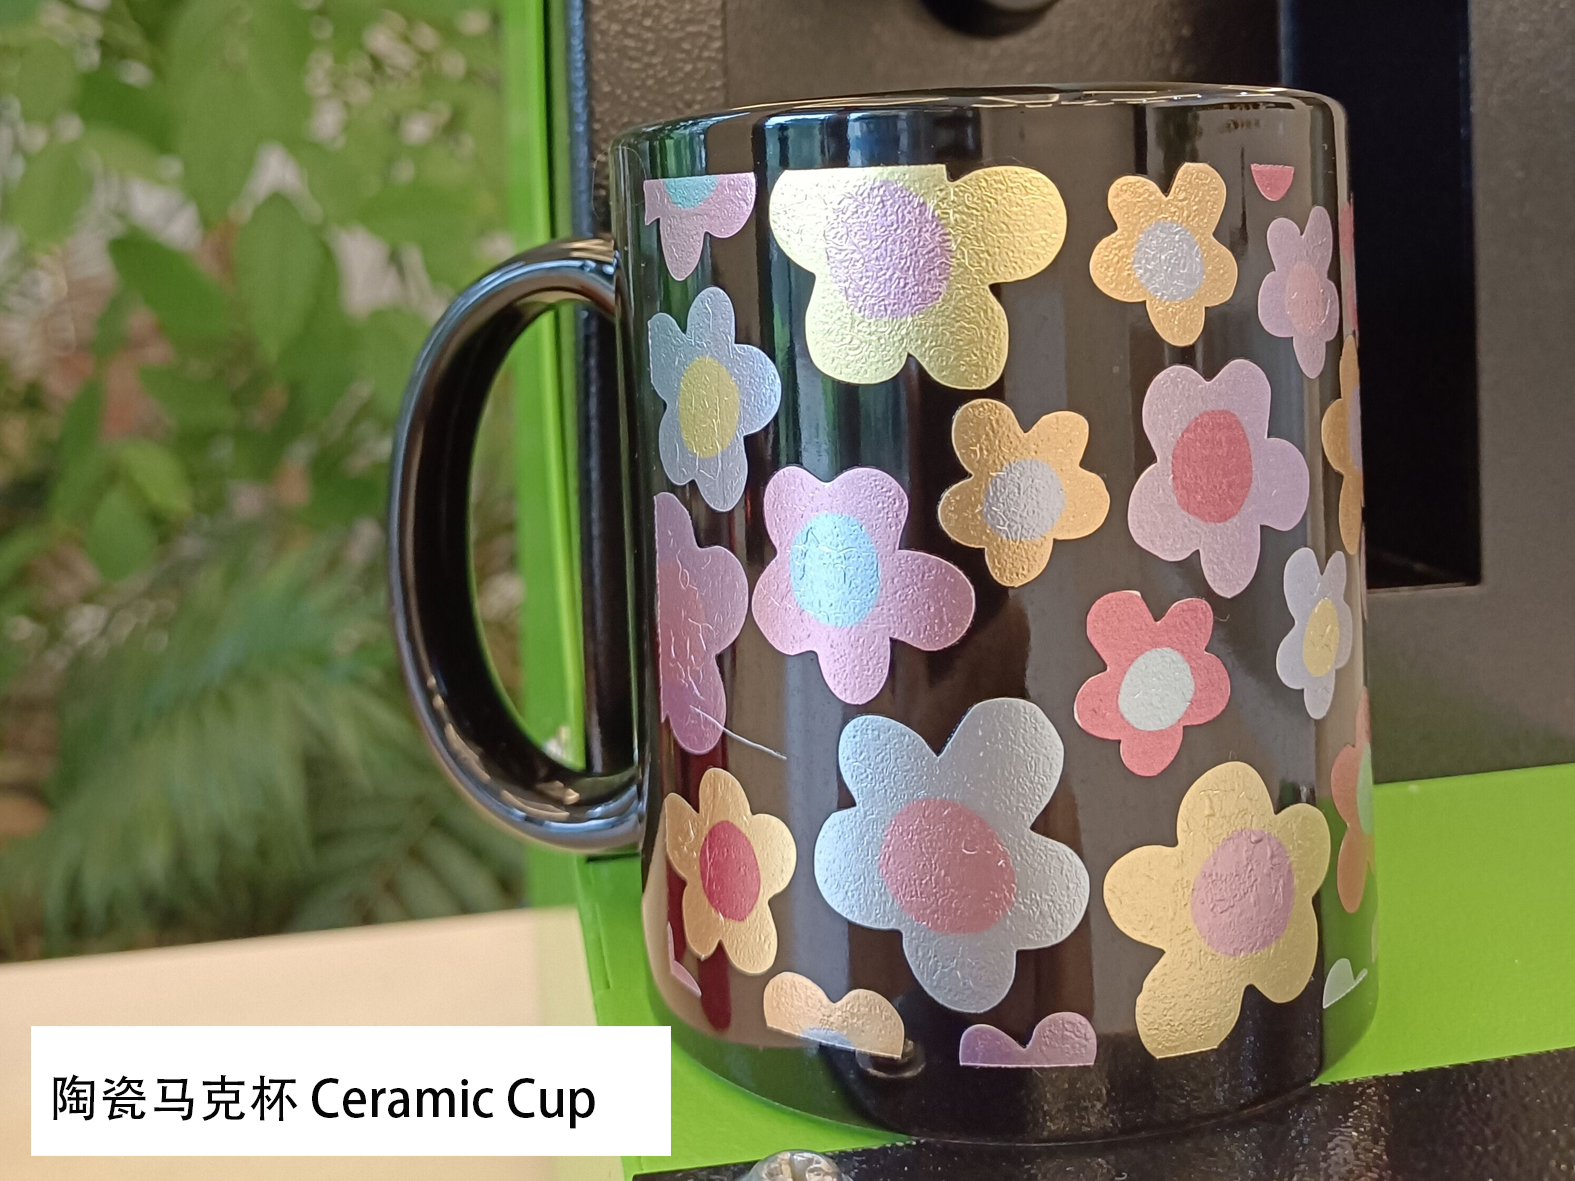 https://www.alizarinchina.com/solutions/which-investment-is-best-for-beginner-to-the-colorful-logo-of-ceramic-mug/